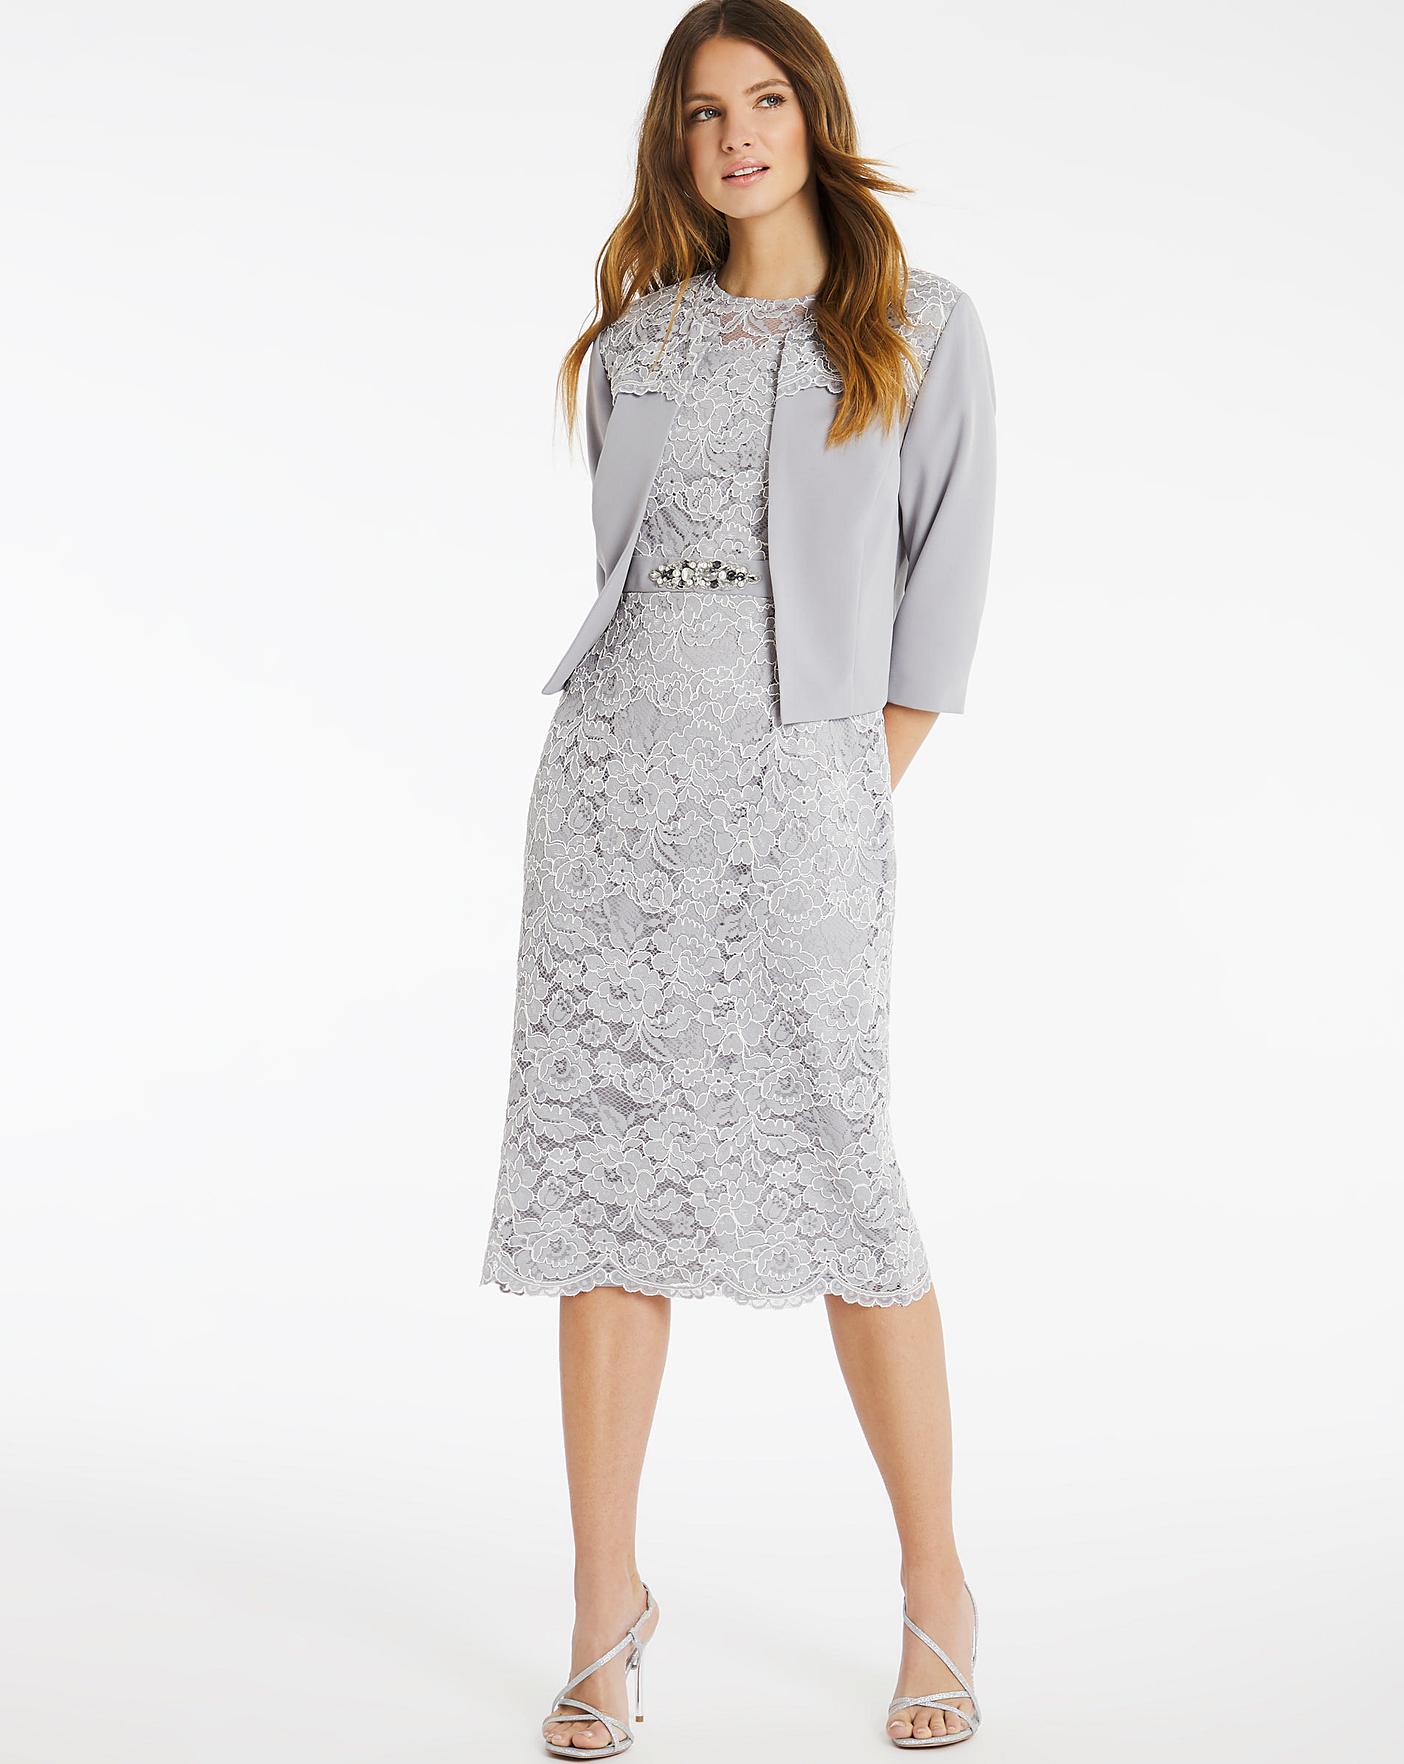 Buy > nightingales jacquard dress and jacket > in stock